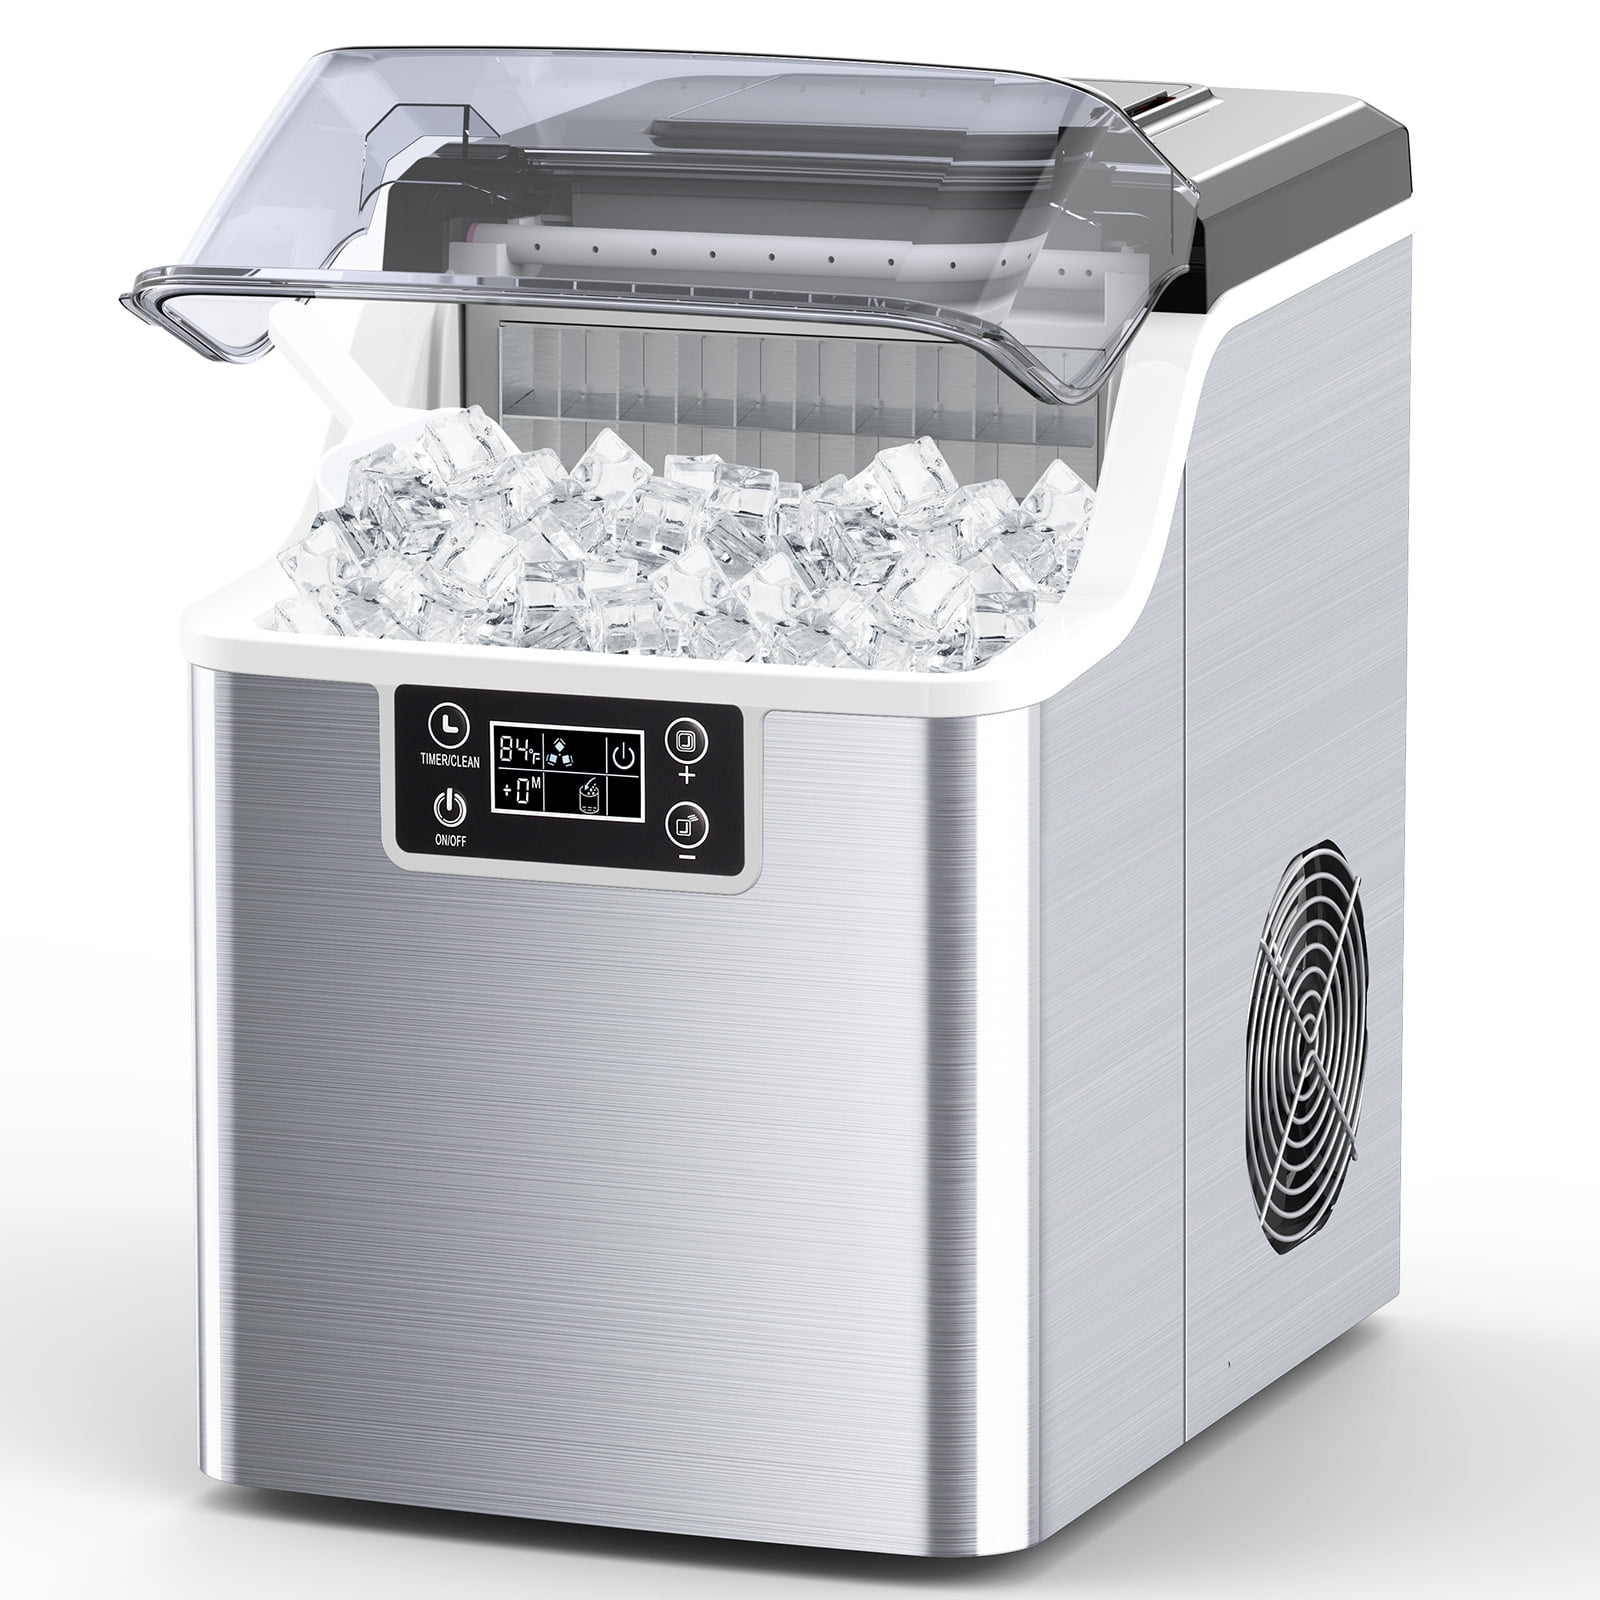 Besttey Portable Square Ice Maker 45lbs/Day, 2 Ways Water Refill